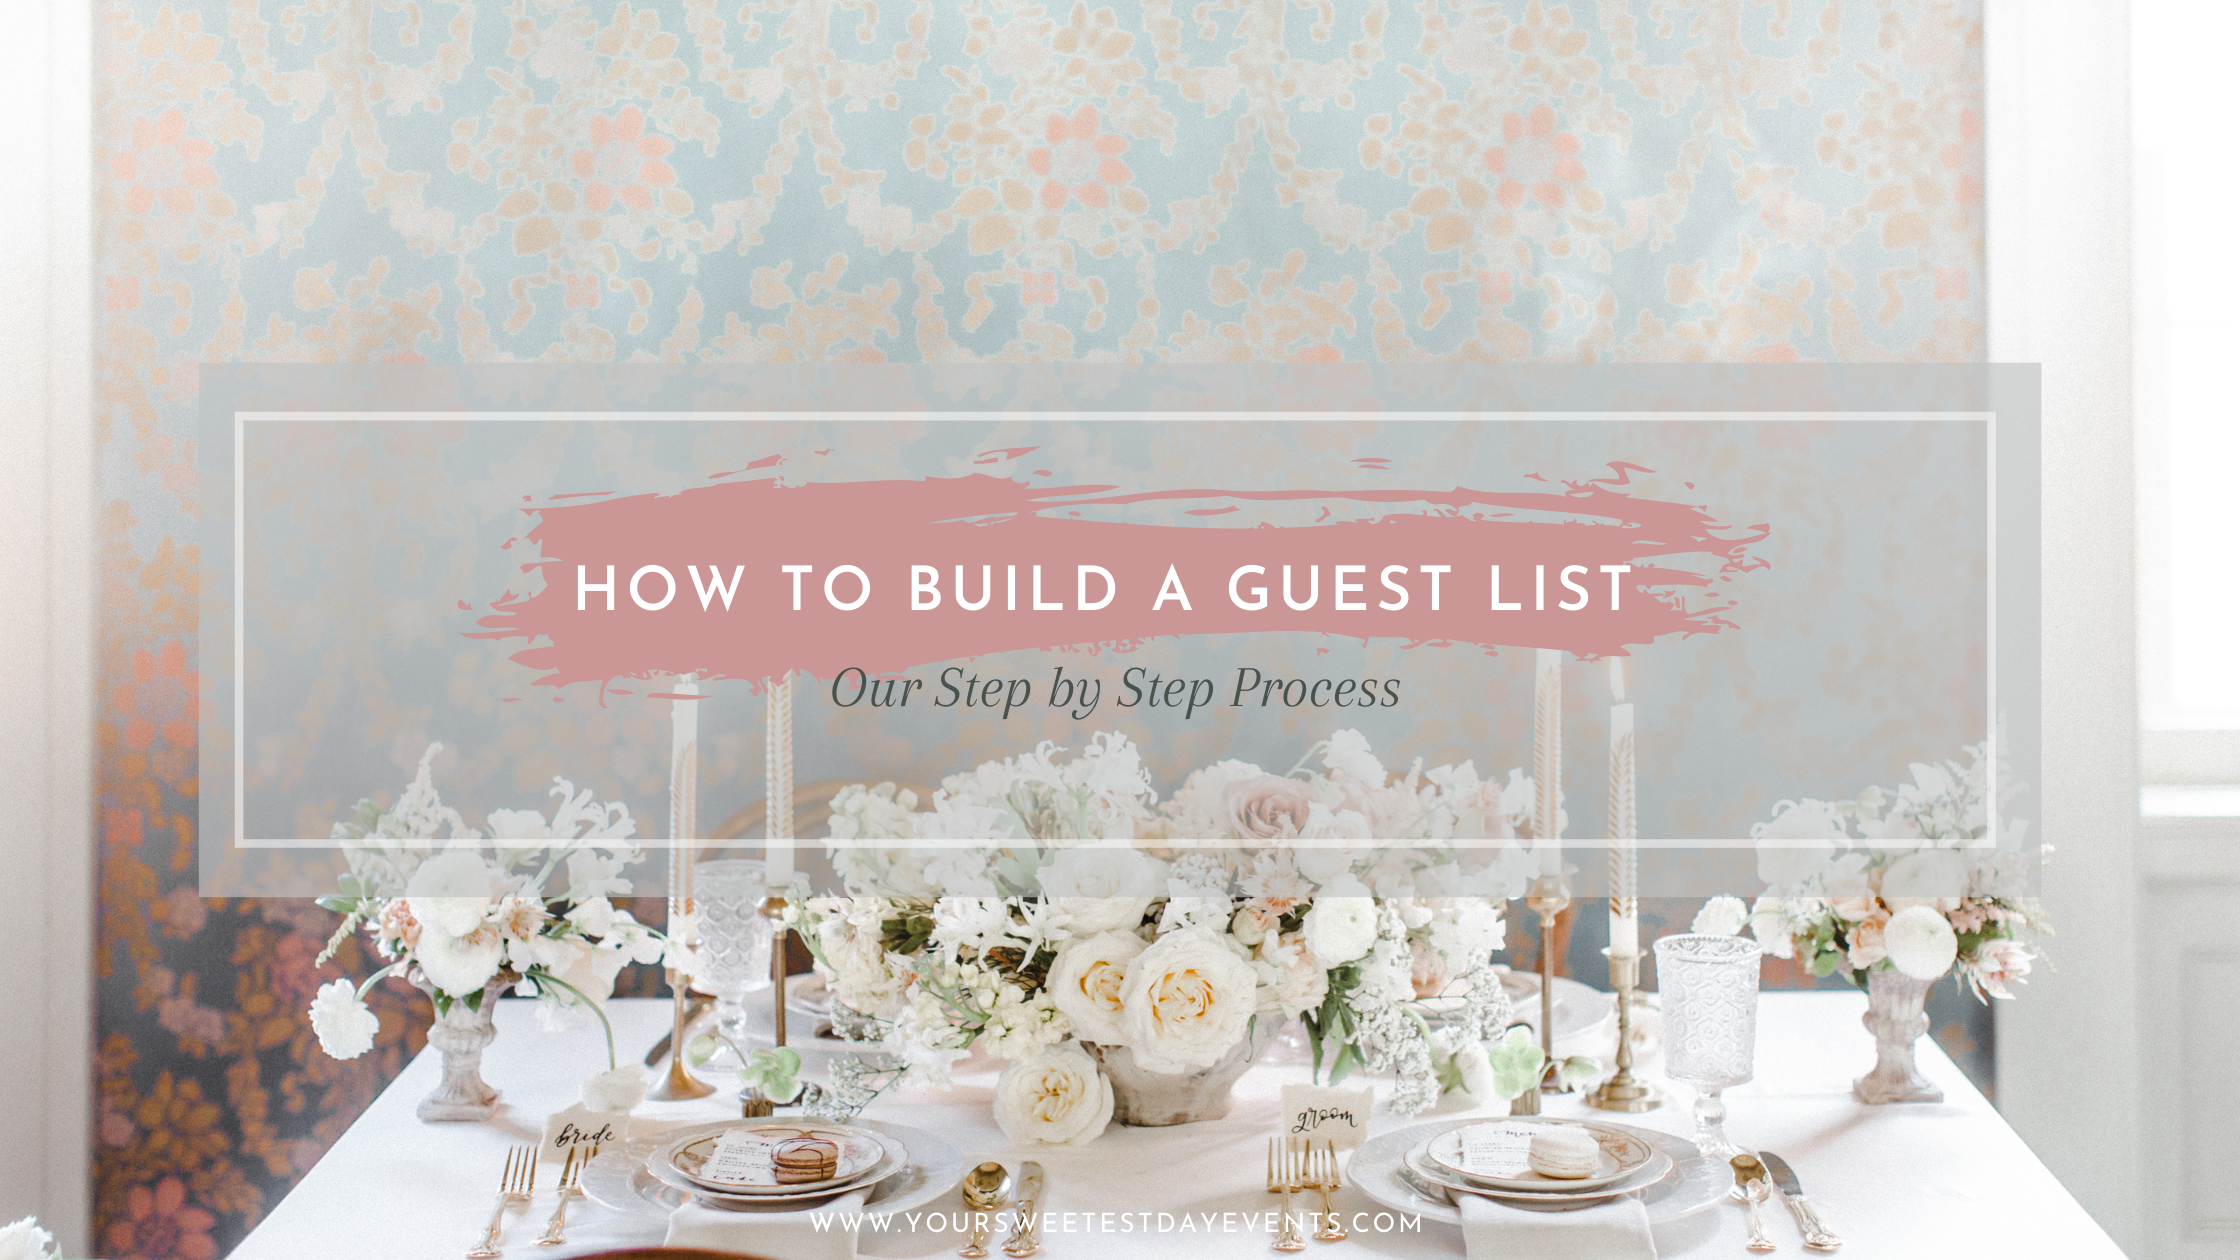 How to Build a Guest List